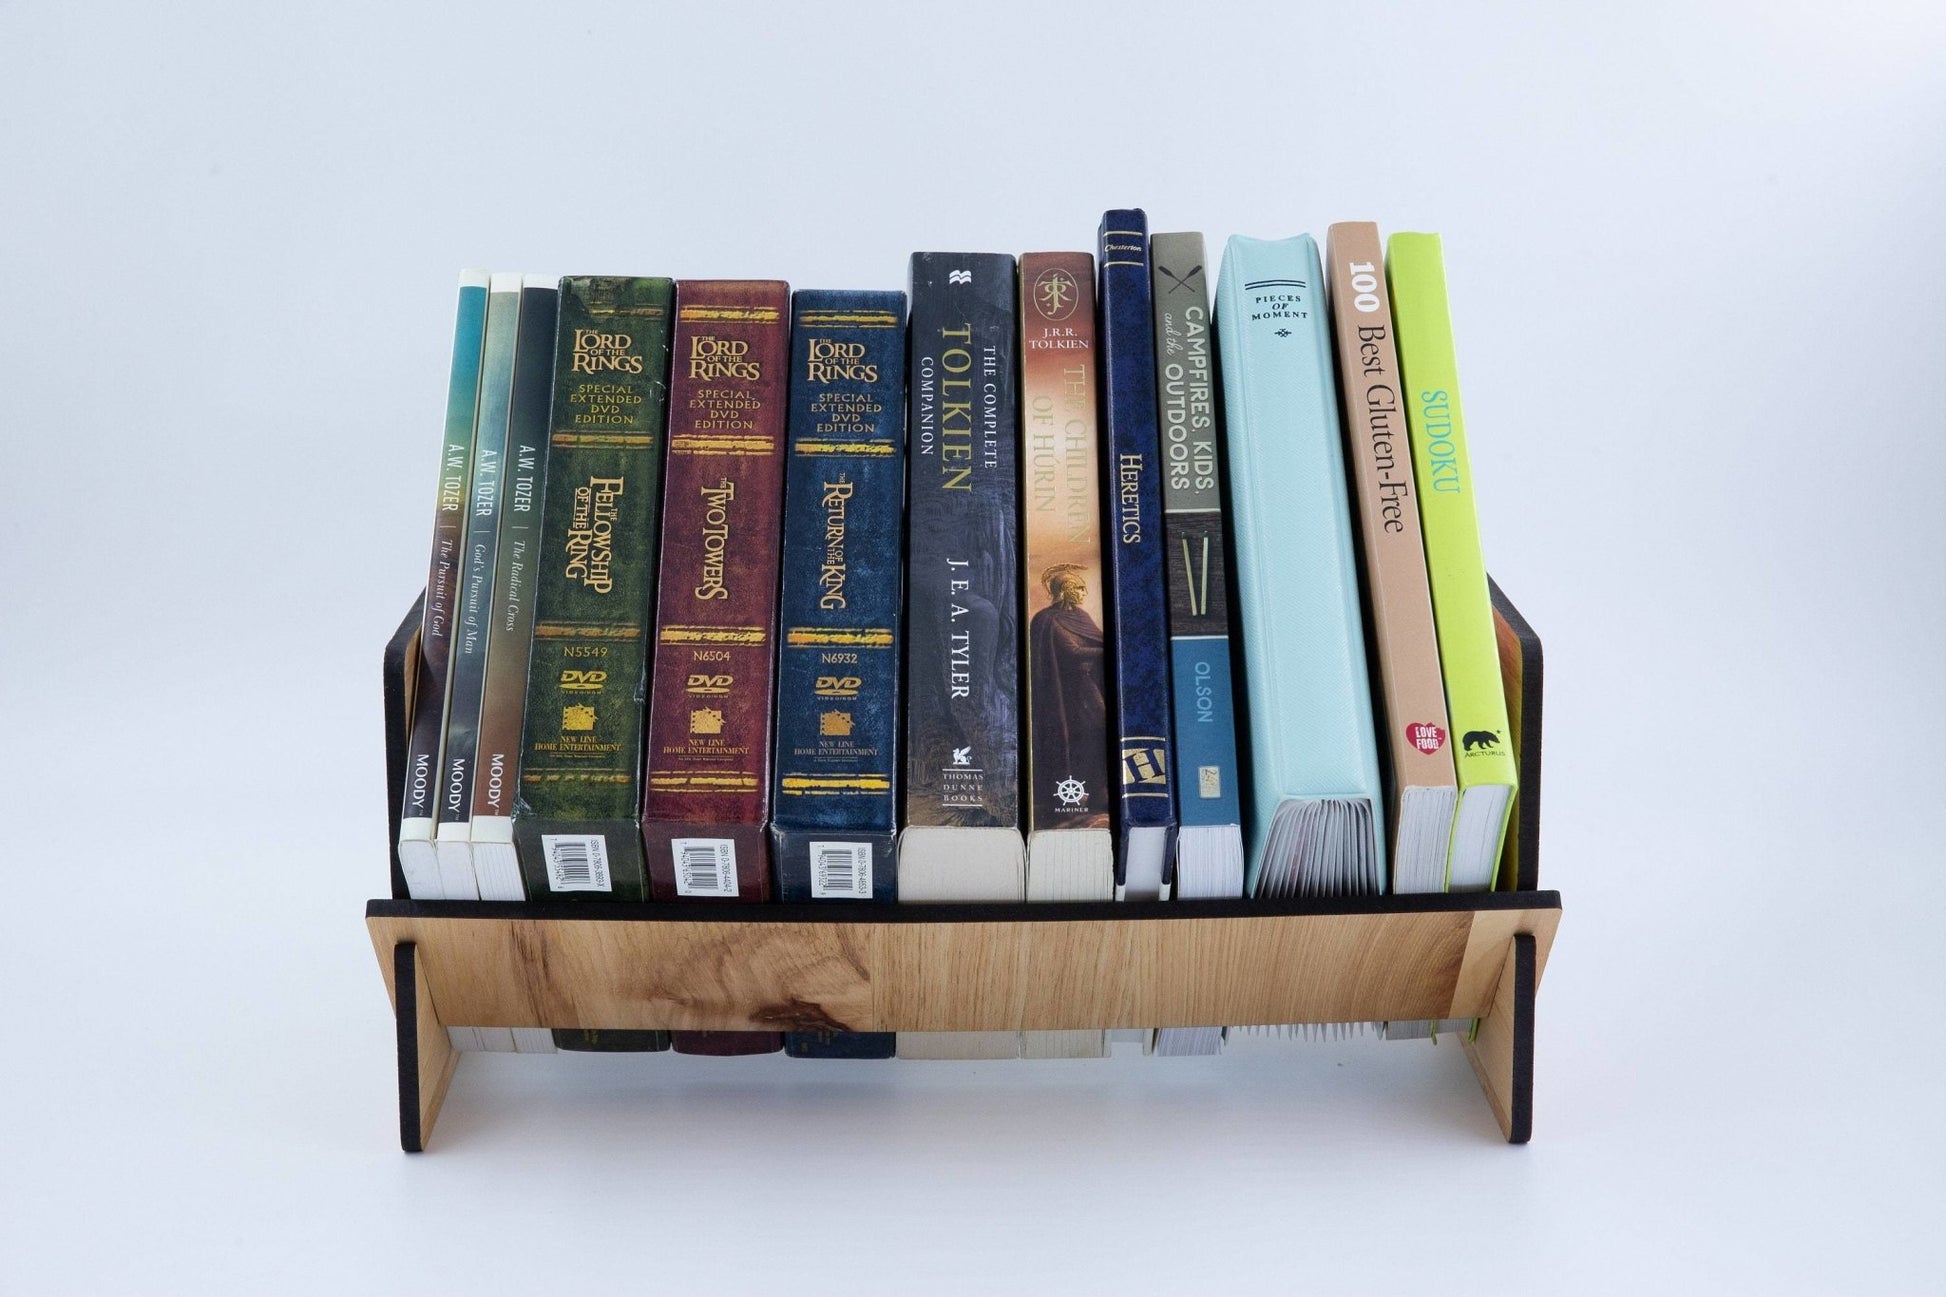 Tabletop Bookshelf - Happy's Gifts and Apparel